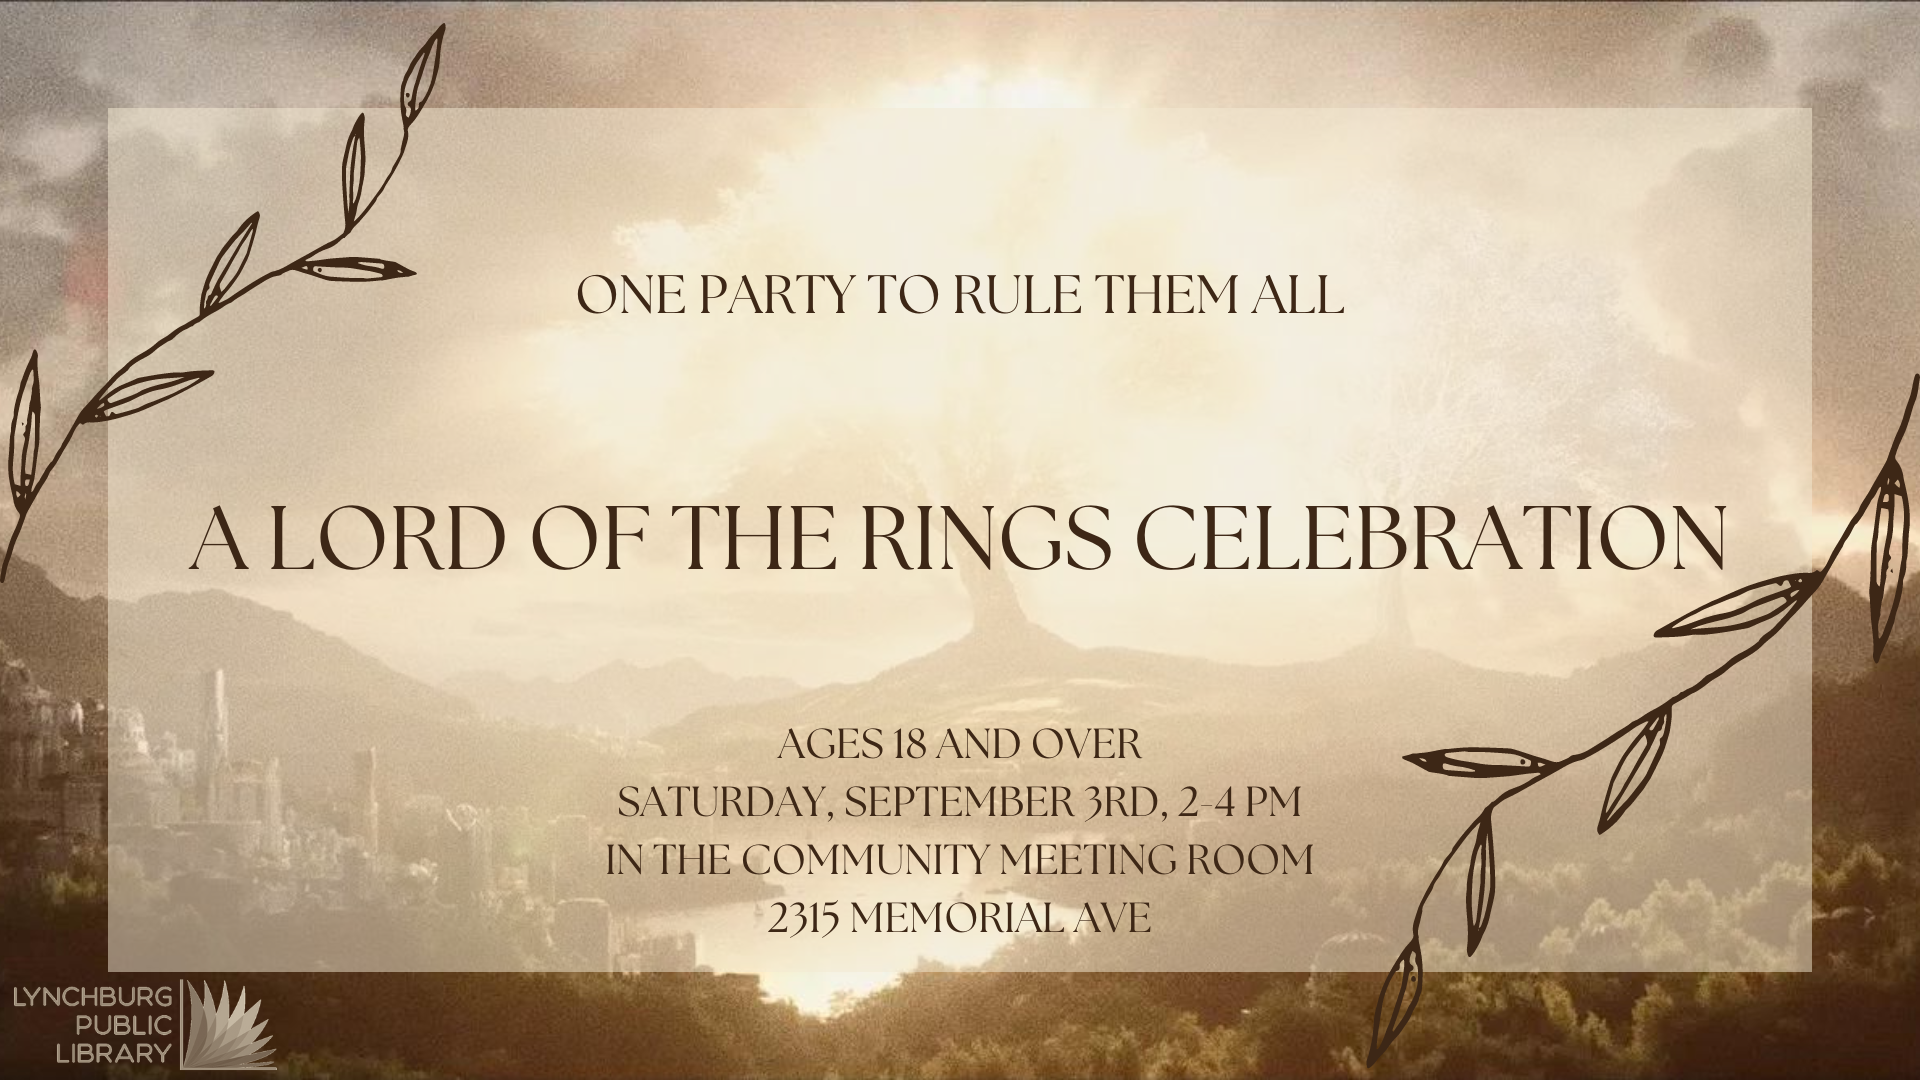 One Party to Rule Them All; A Lord of the Rings Celebration; Ages 18 and Over; Saturday, September 3rd, 2-4 PM; in the Community Meeting Room, 2315 Memorial Ave